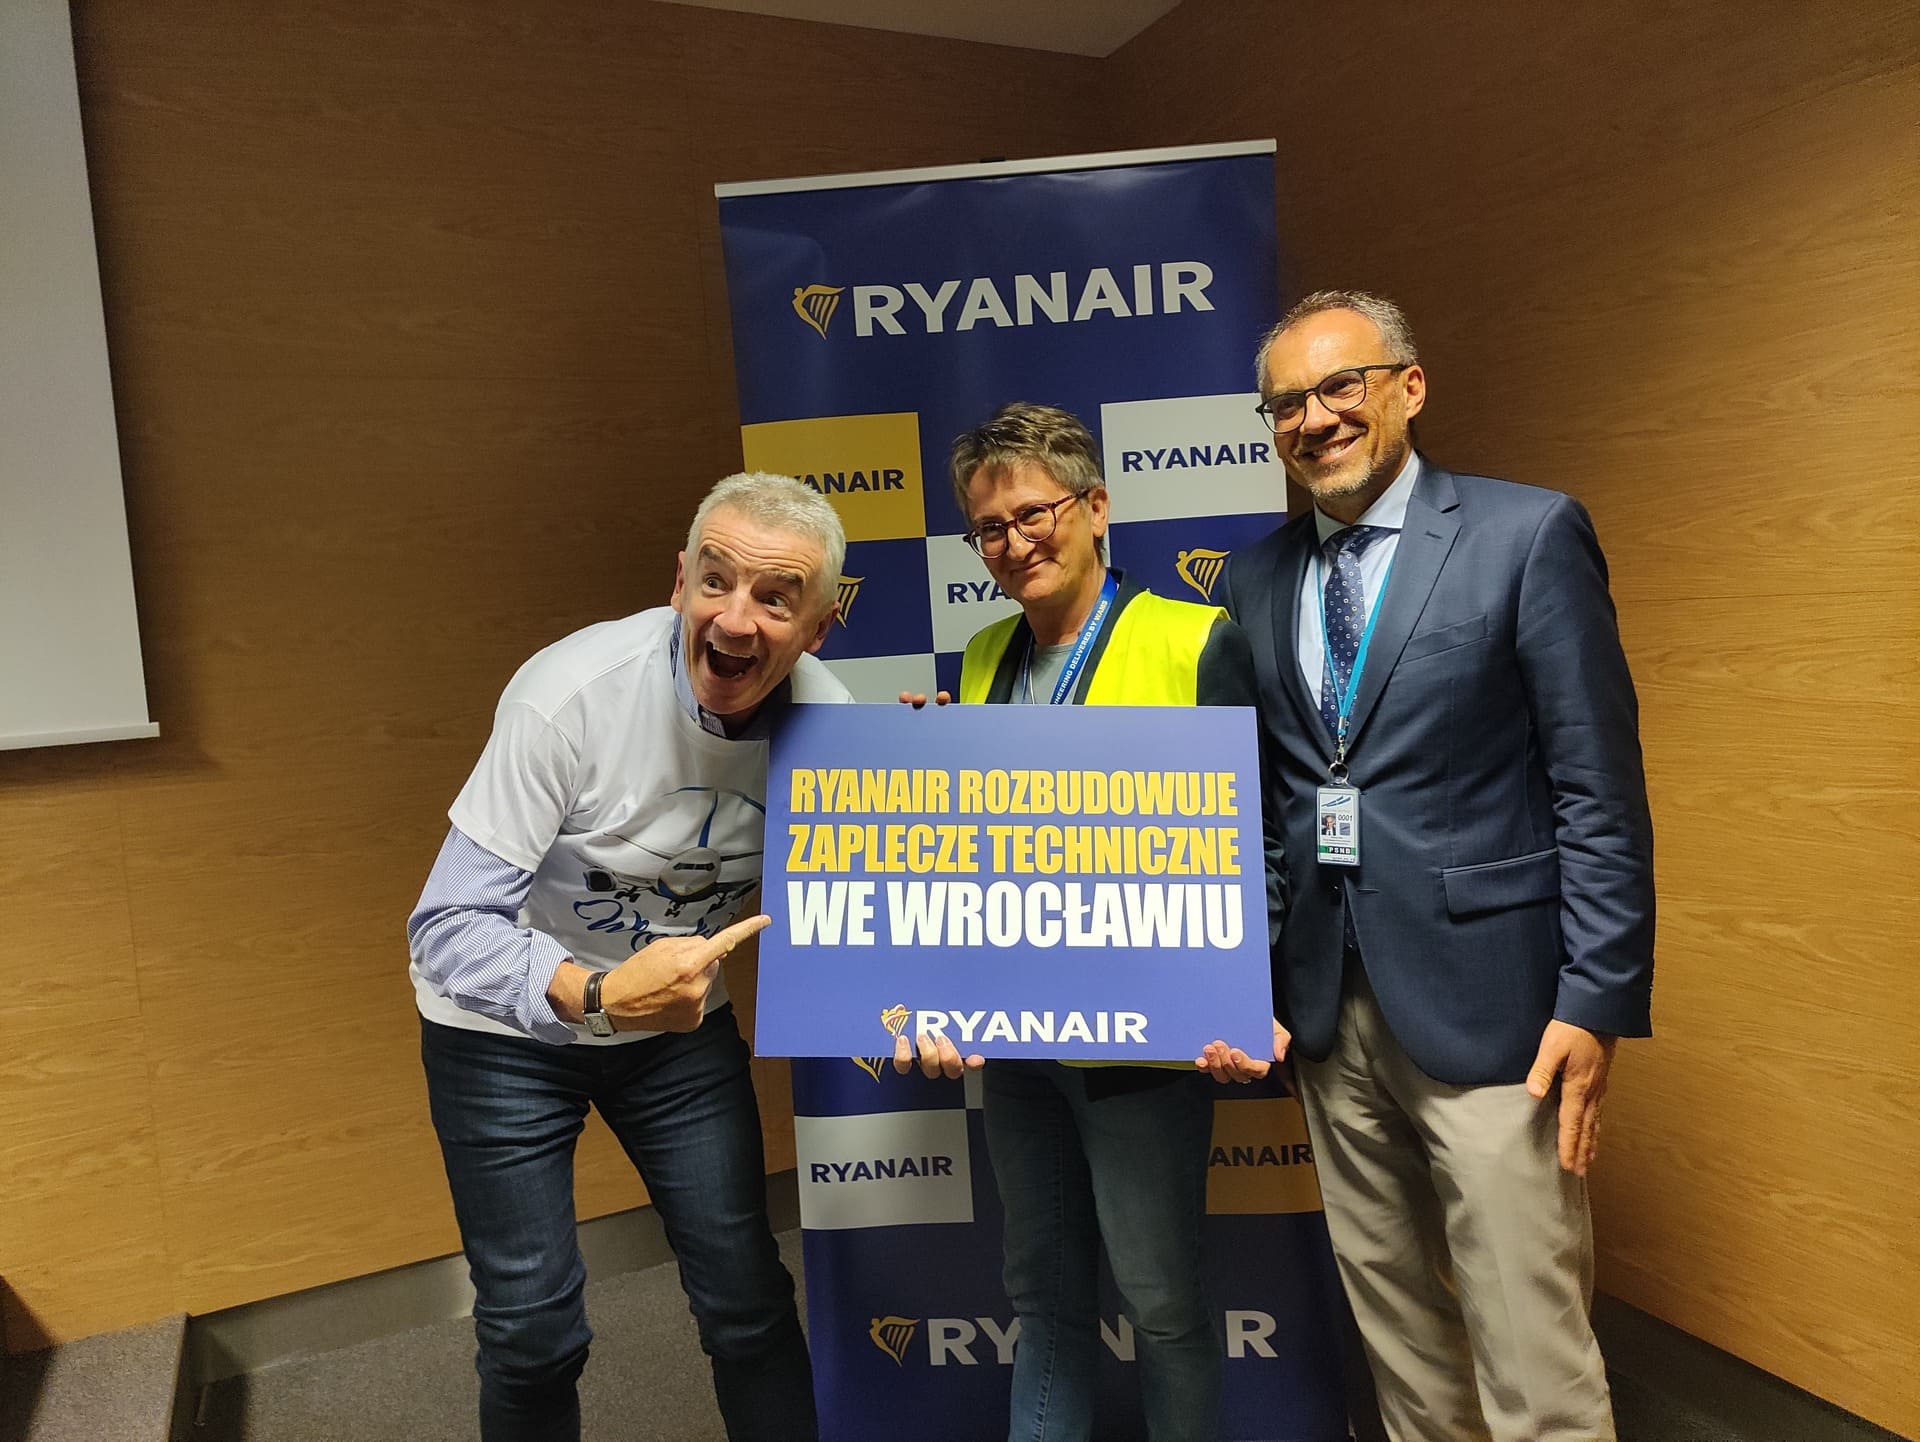 Ryanair airline to expand its aircraft maintenance facilities in Wroclaw